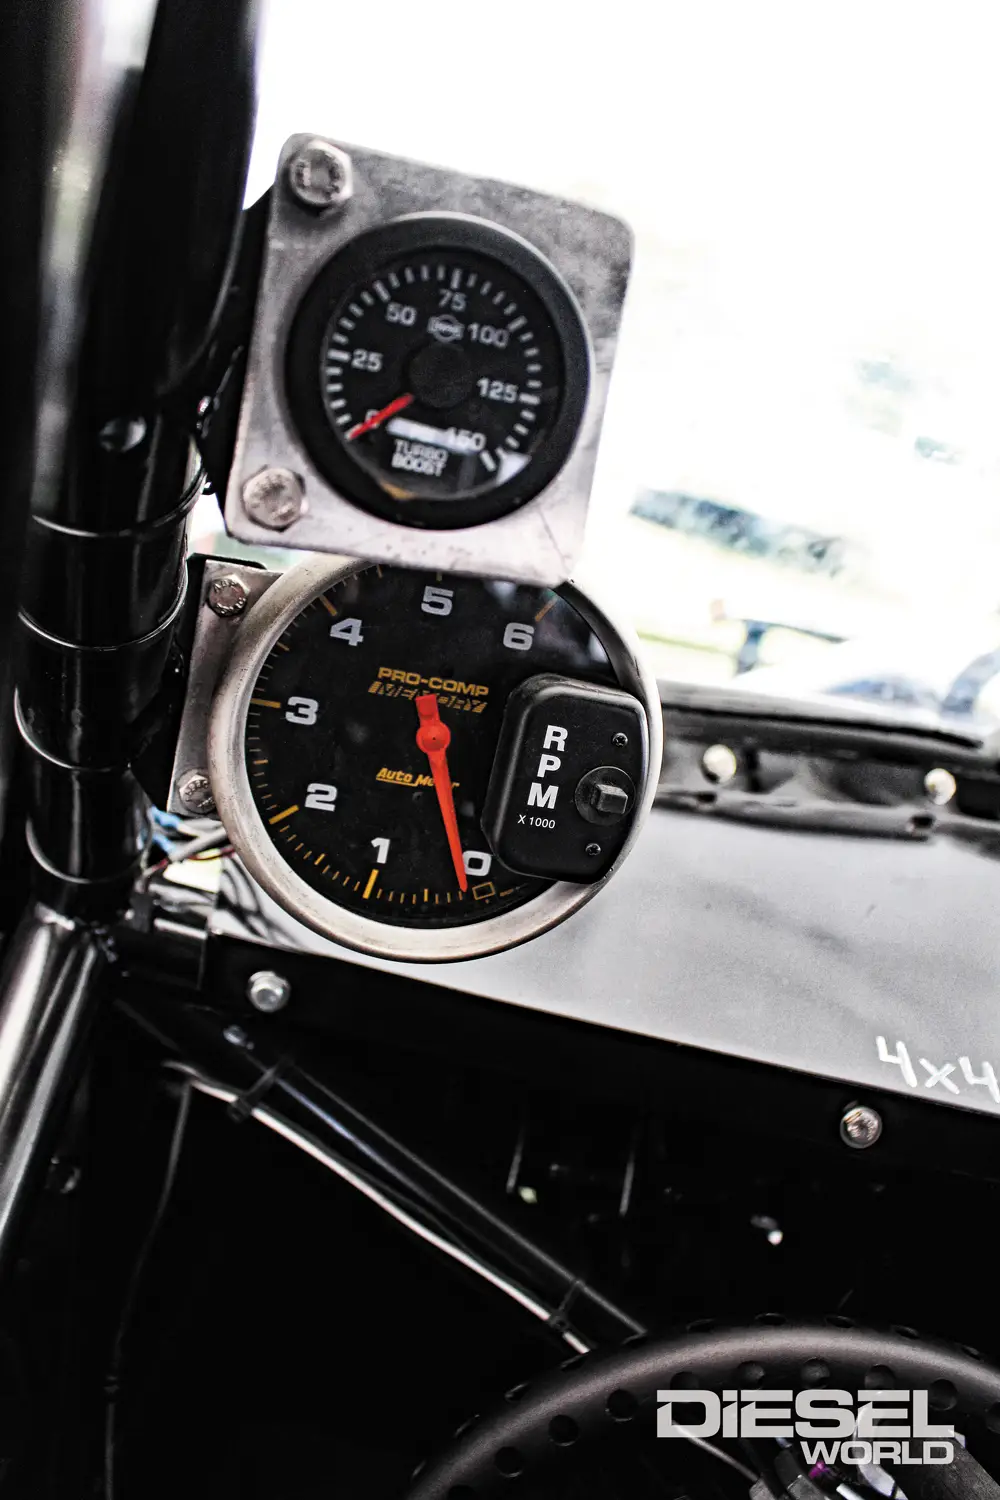 Pro-Comp series tachometer and boost gauge from Auto Meter